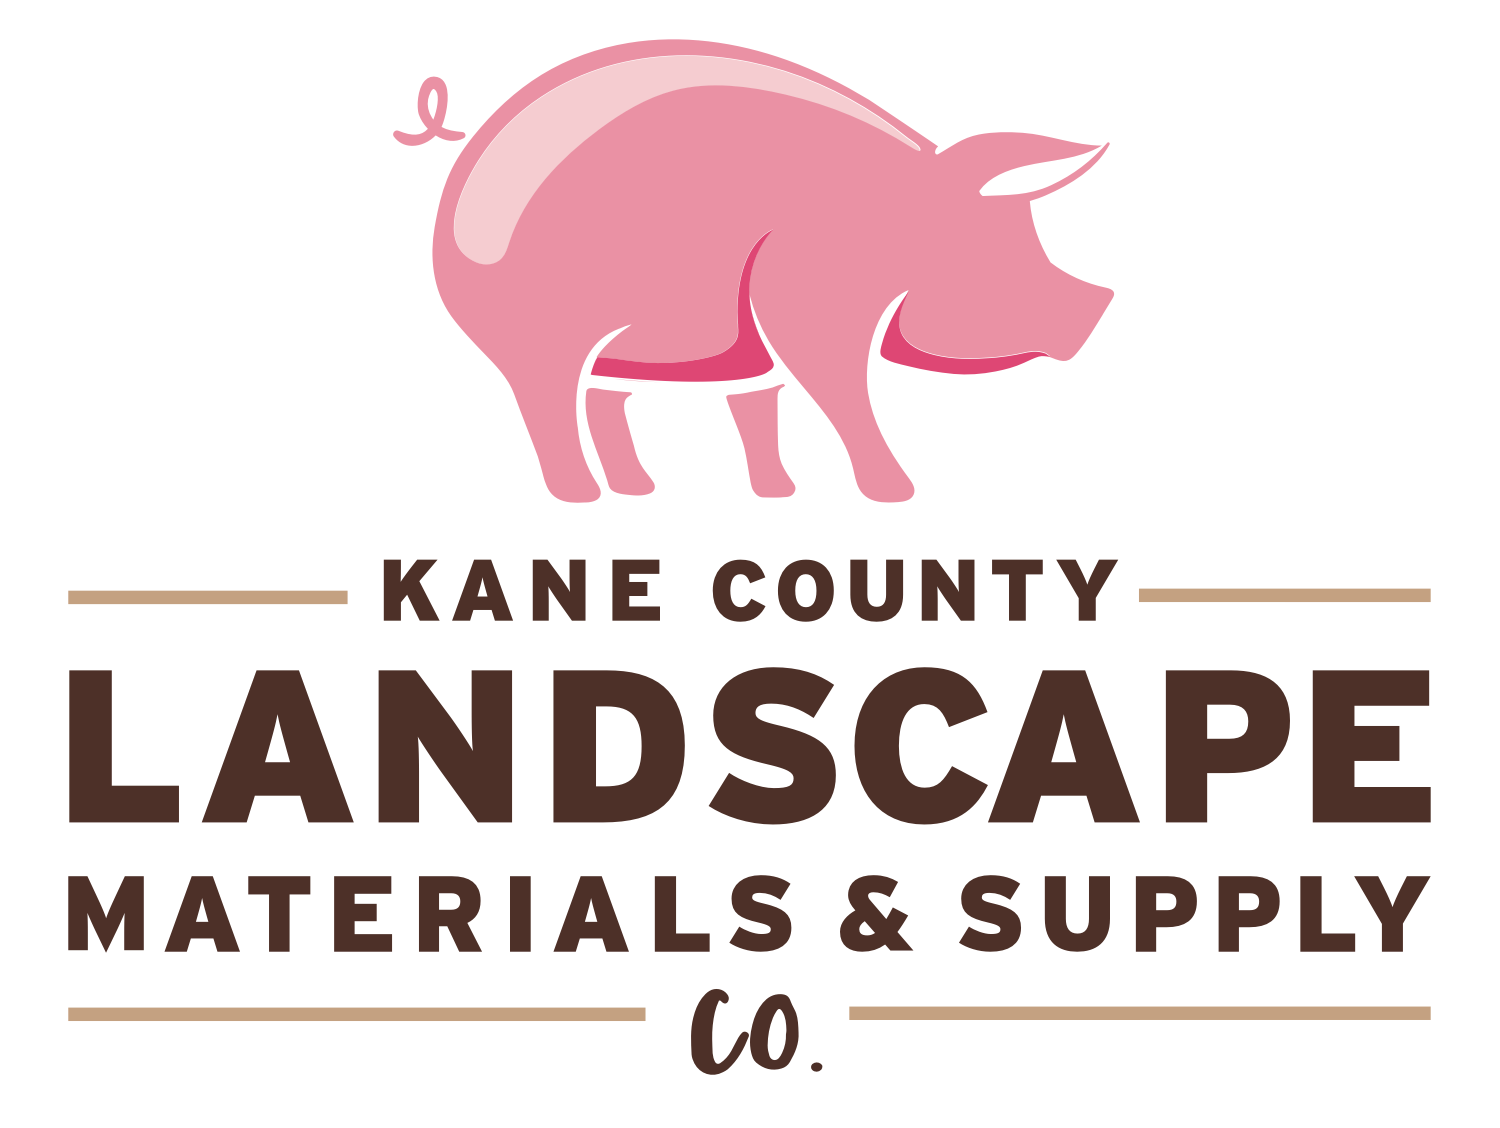 Kane County Landscape Materials and Supply